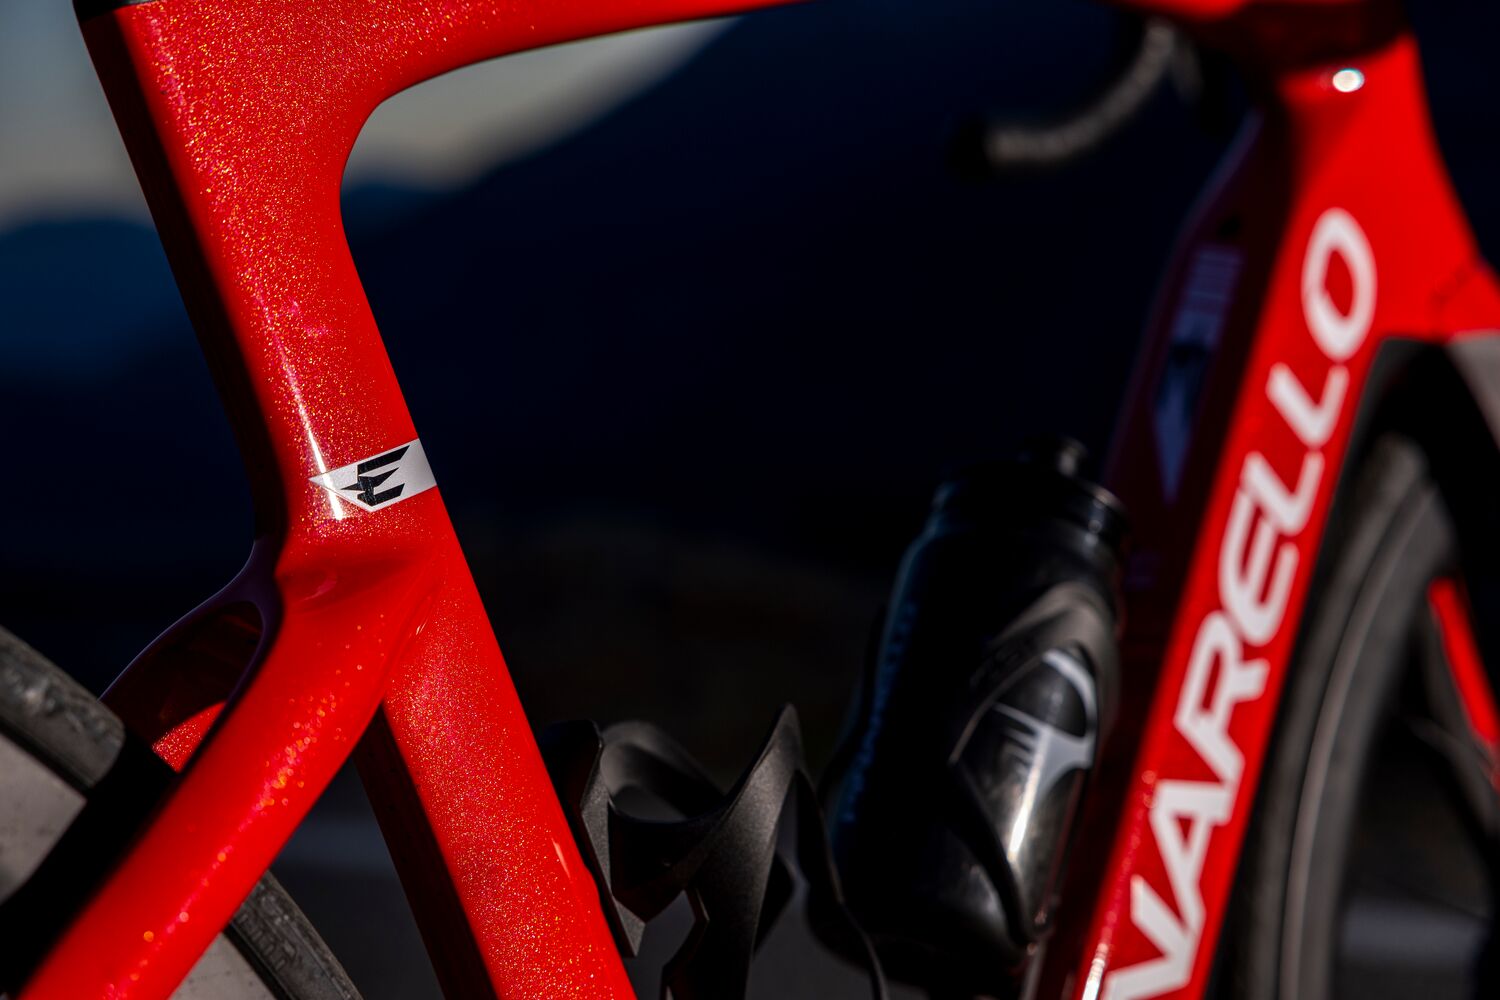 Thieves steal nearly $400,000 of Pinarello bikes in double robbery from brand's HQ